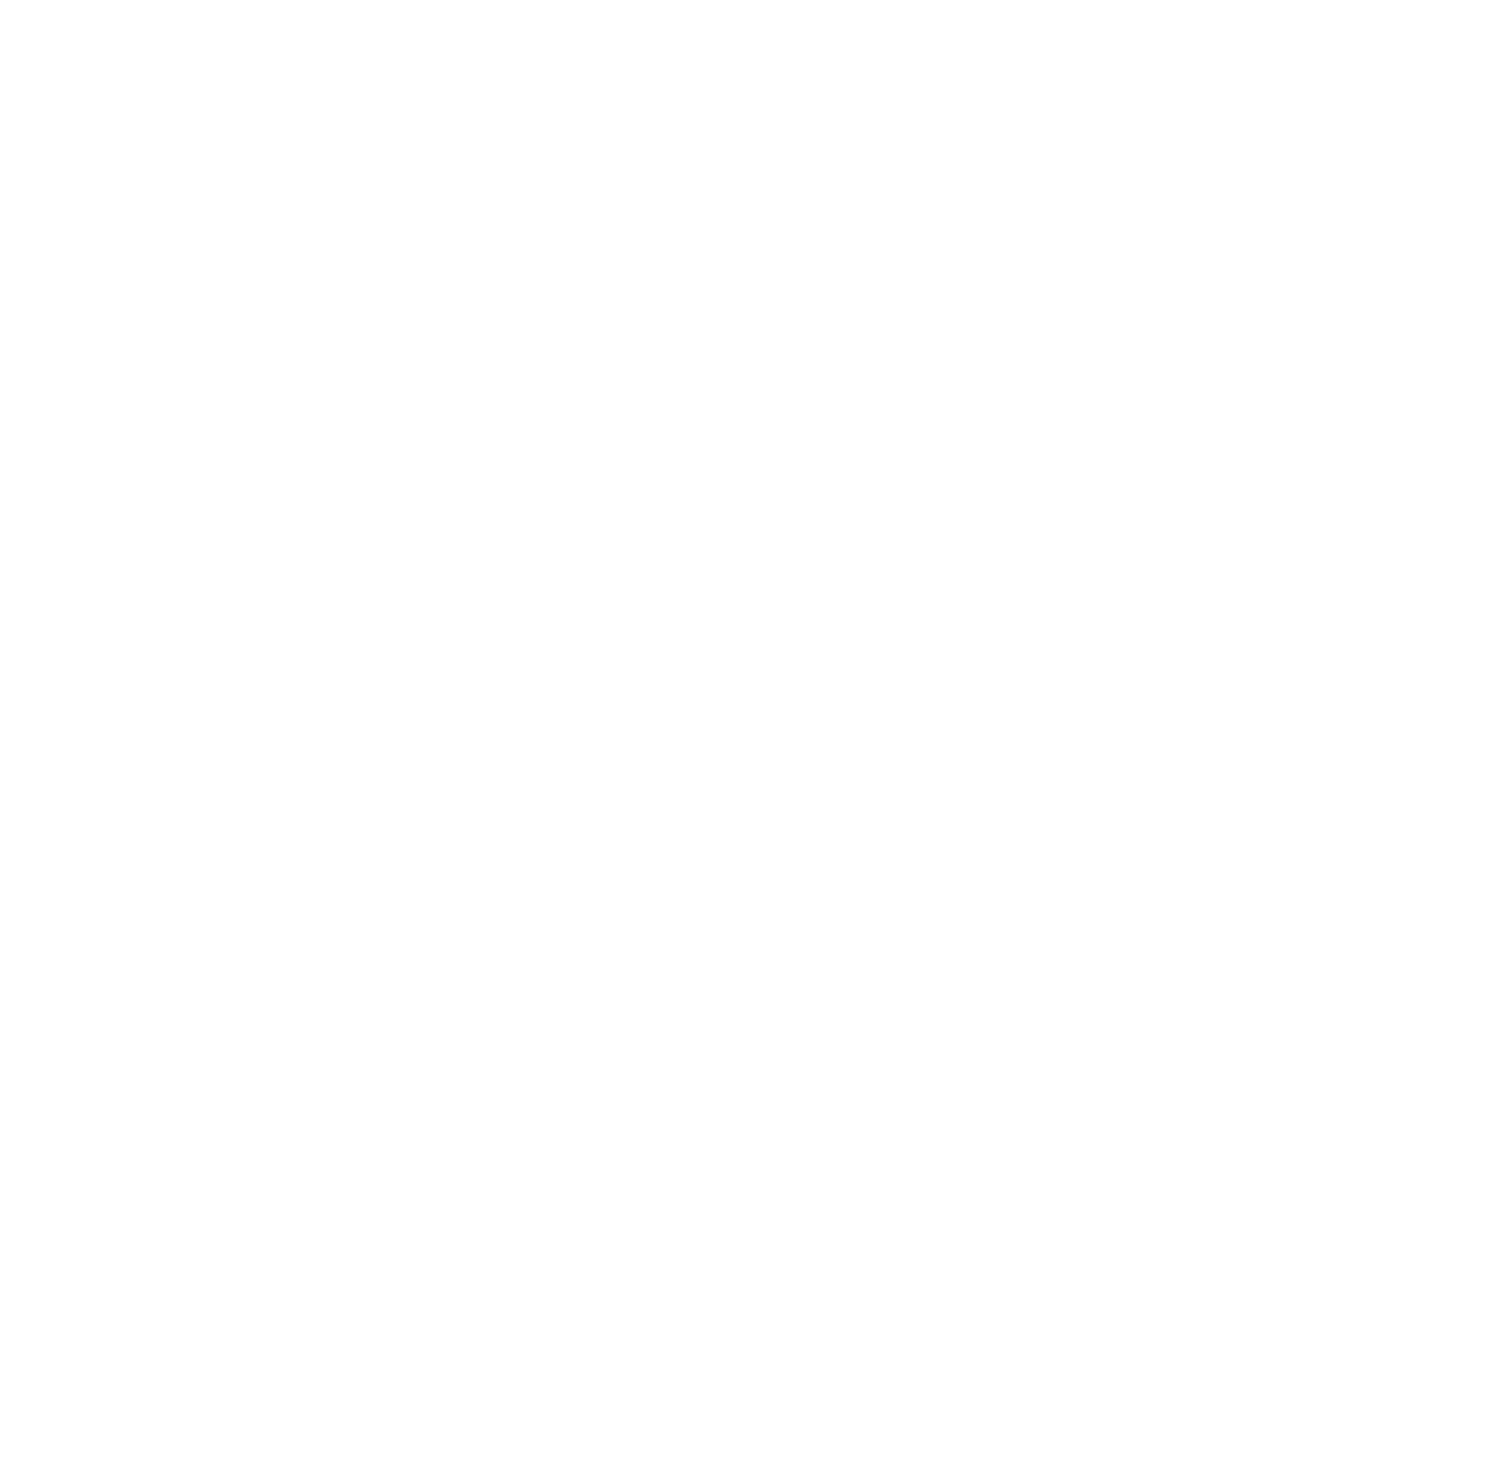 Roots Physio